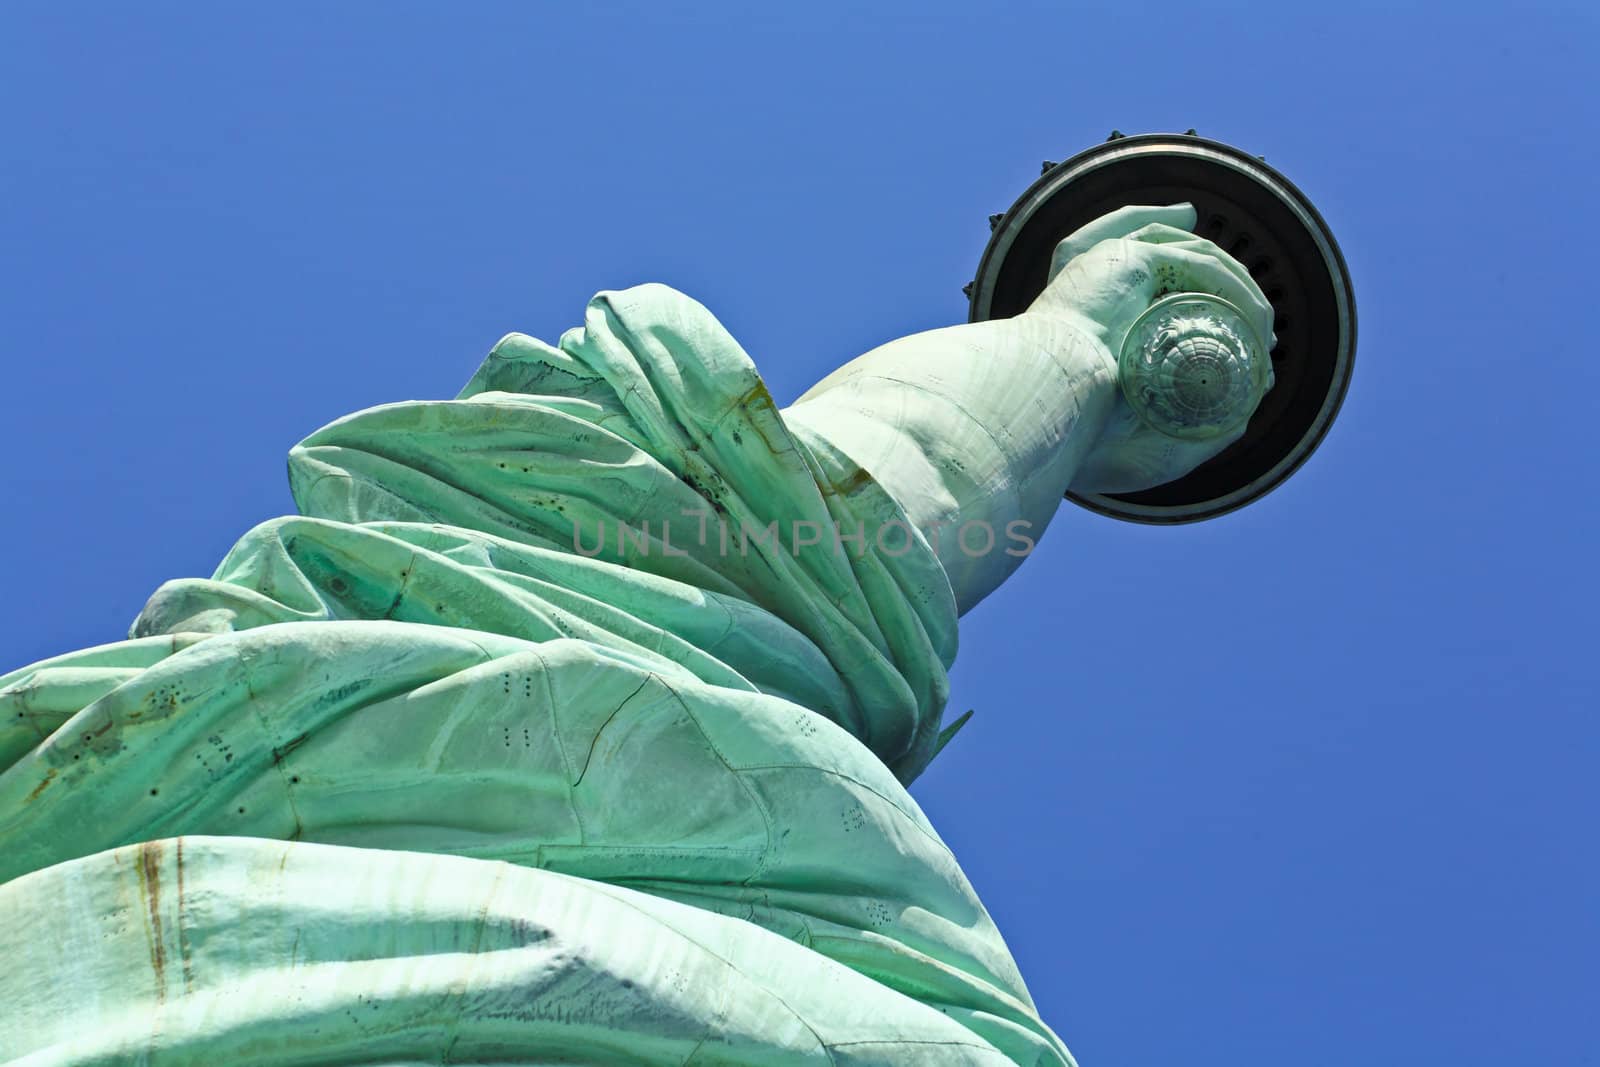 The closeup of the Statue of Liberty in New York Harbor